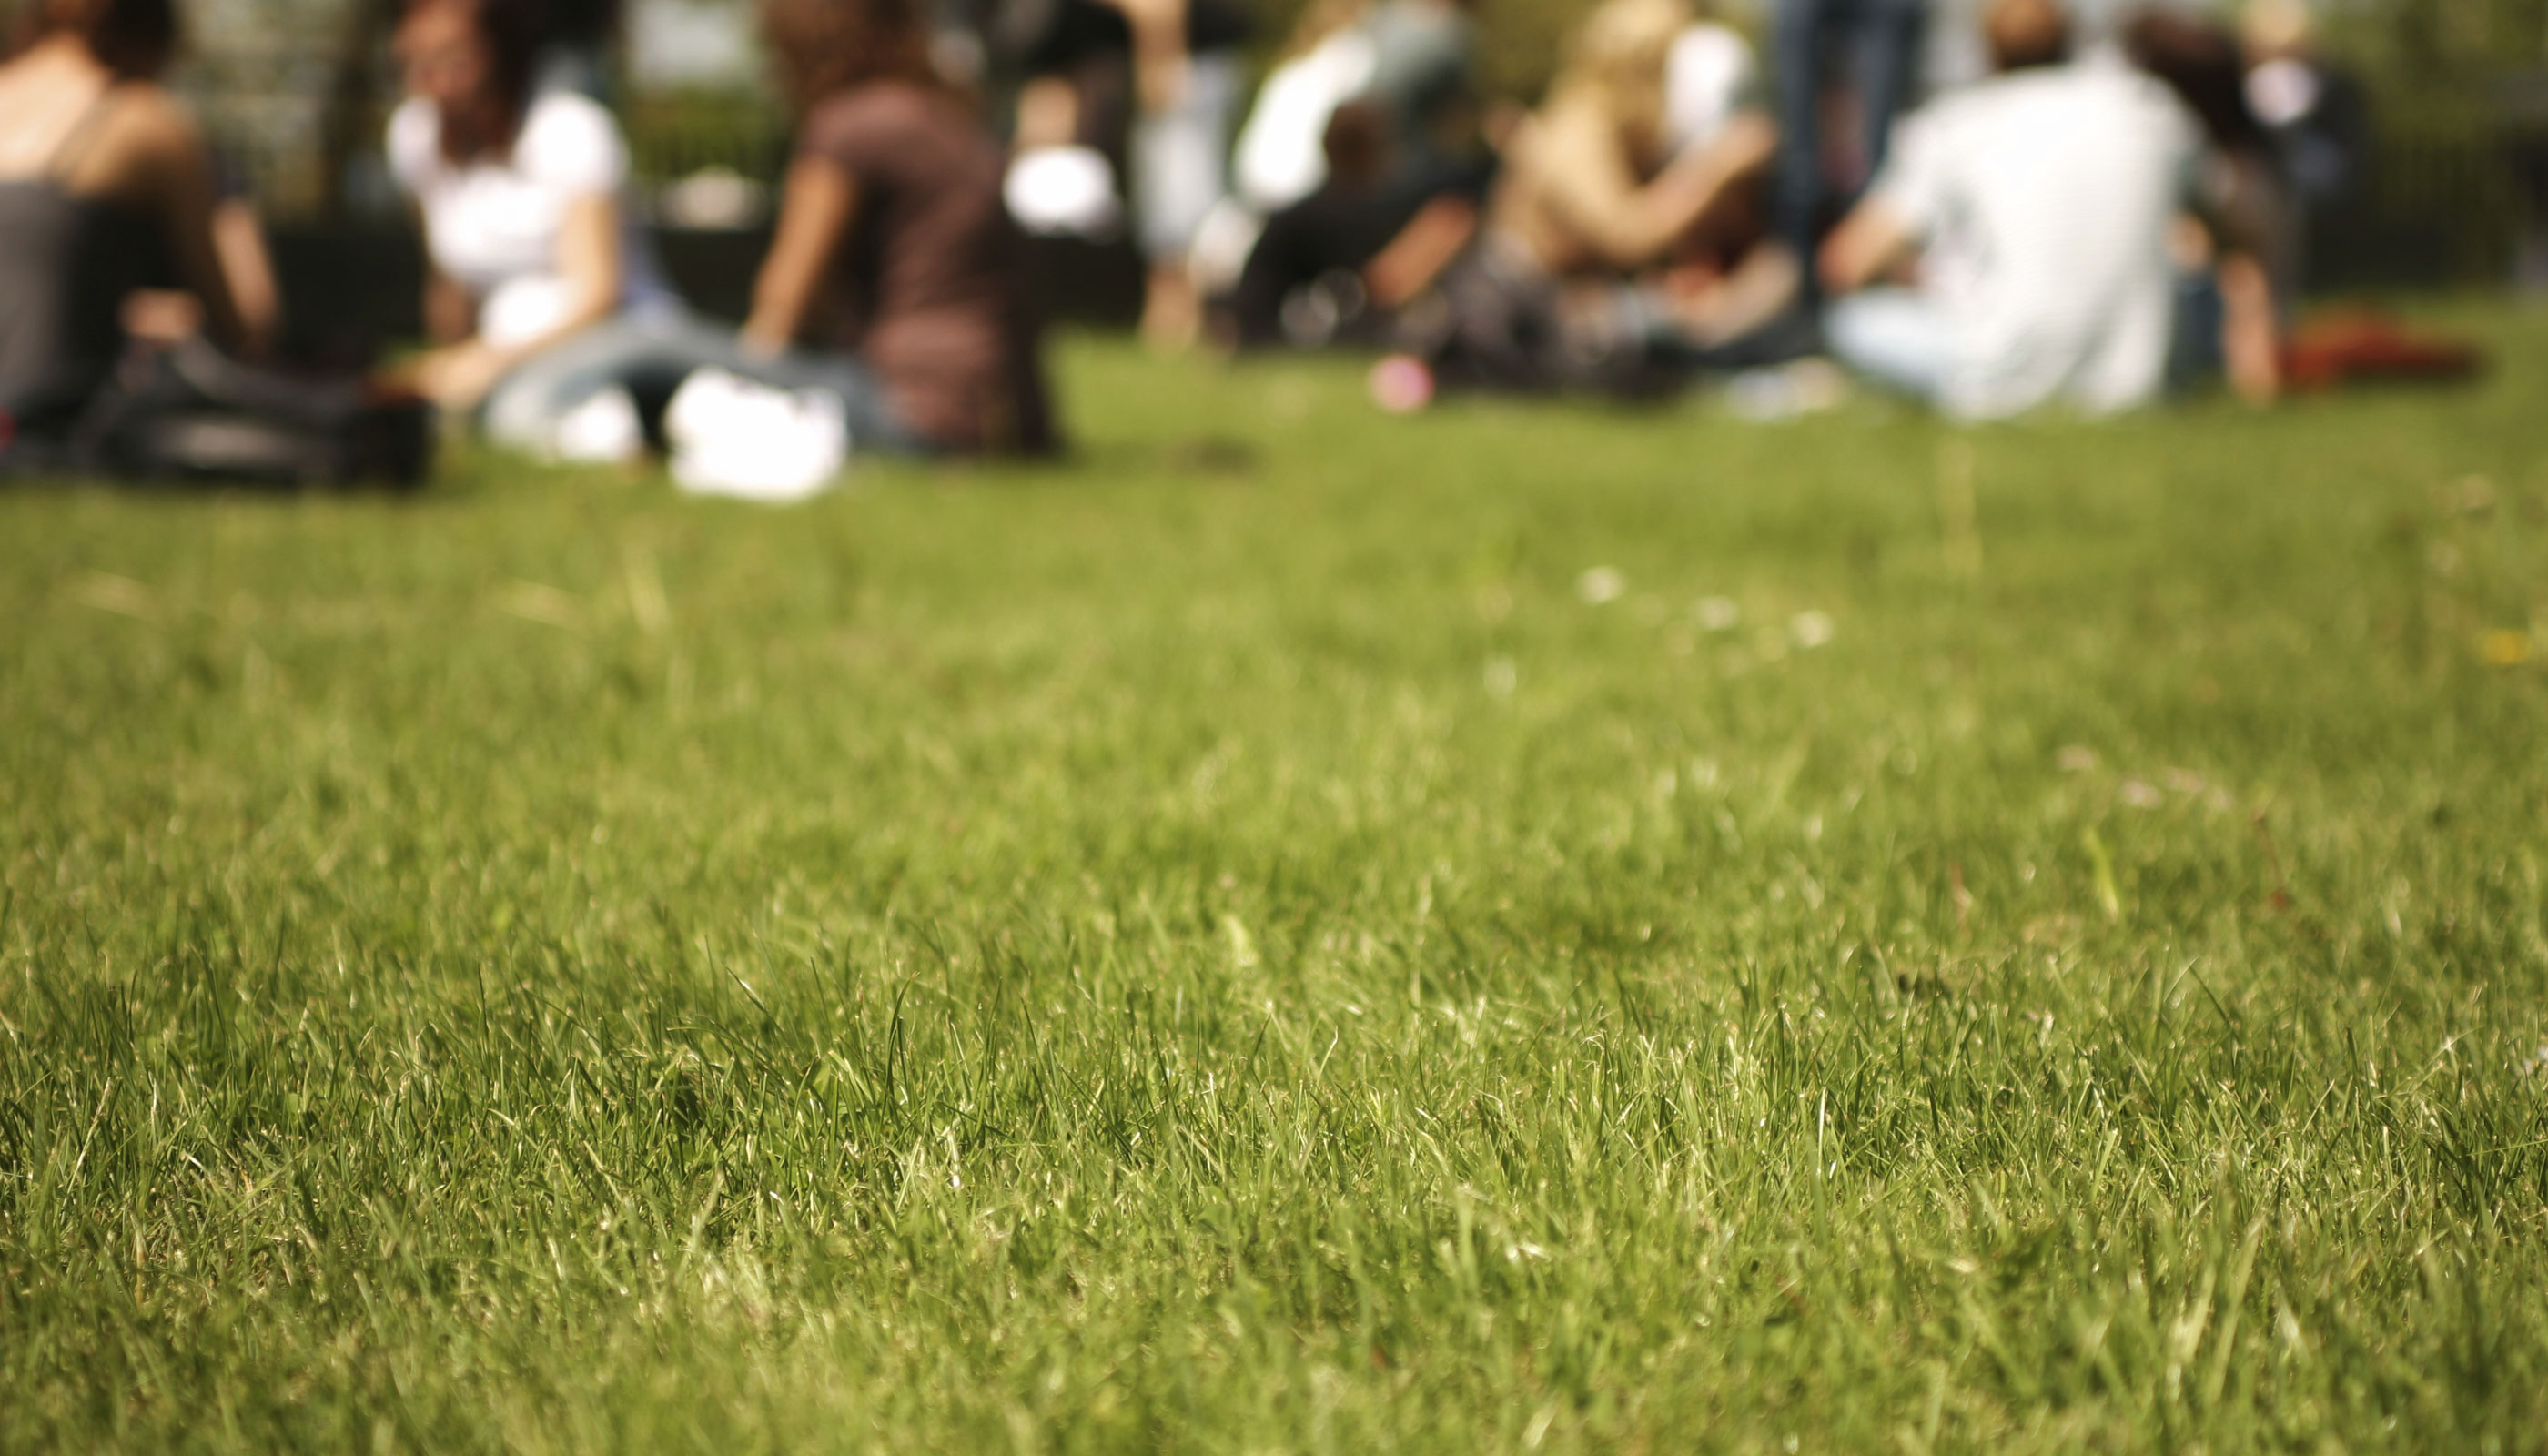 Students in small groups sit on the lawn in a college campus.